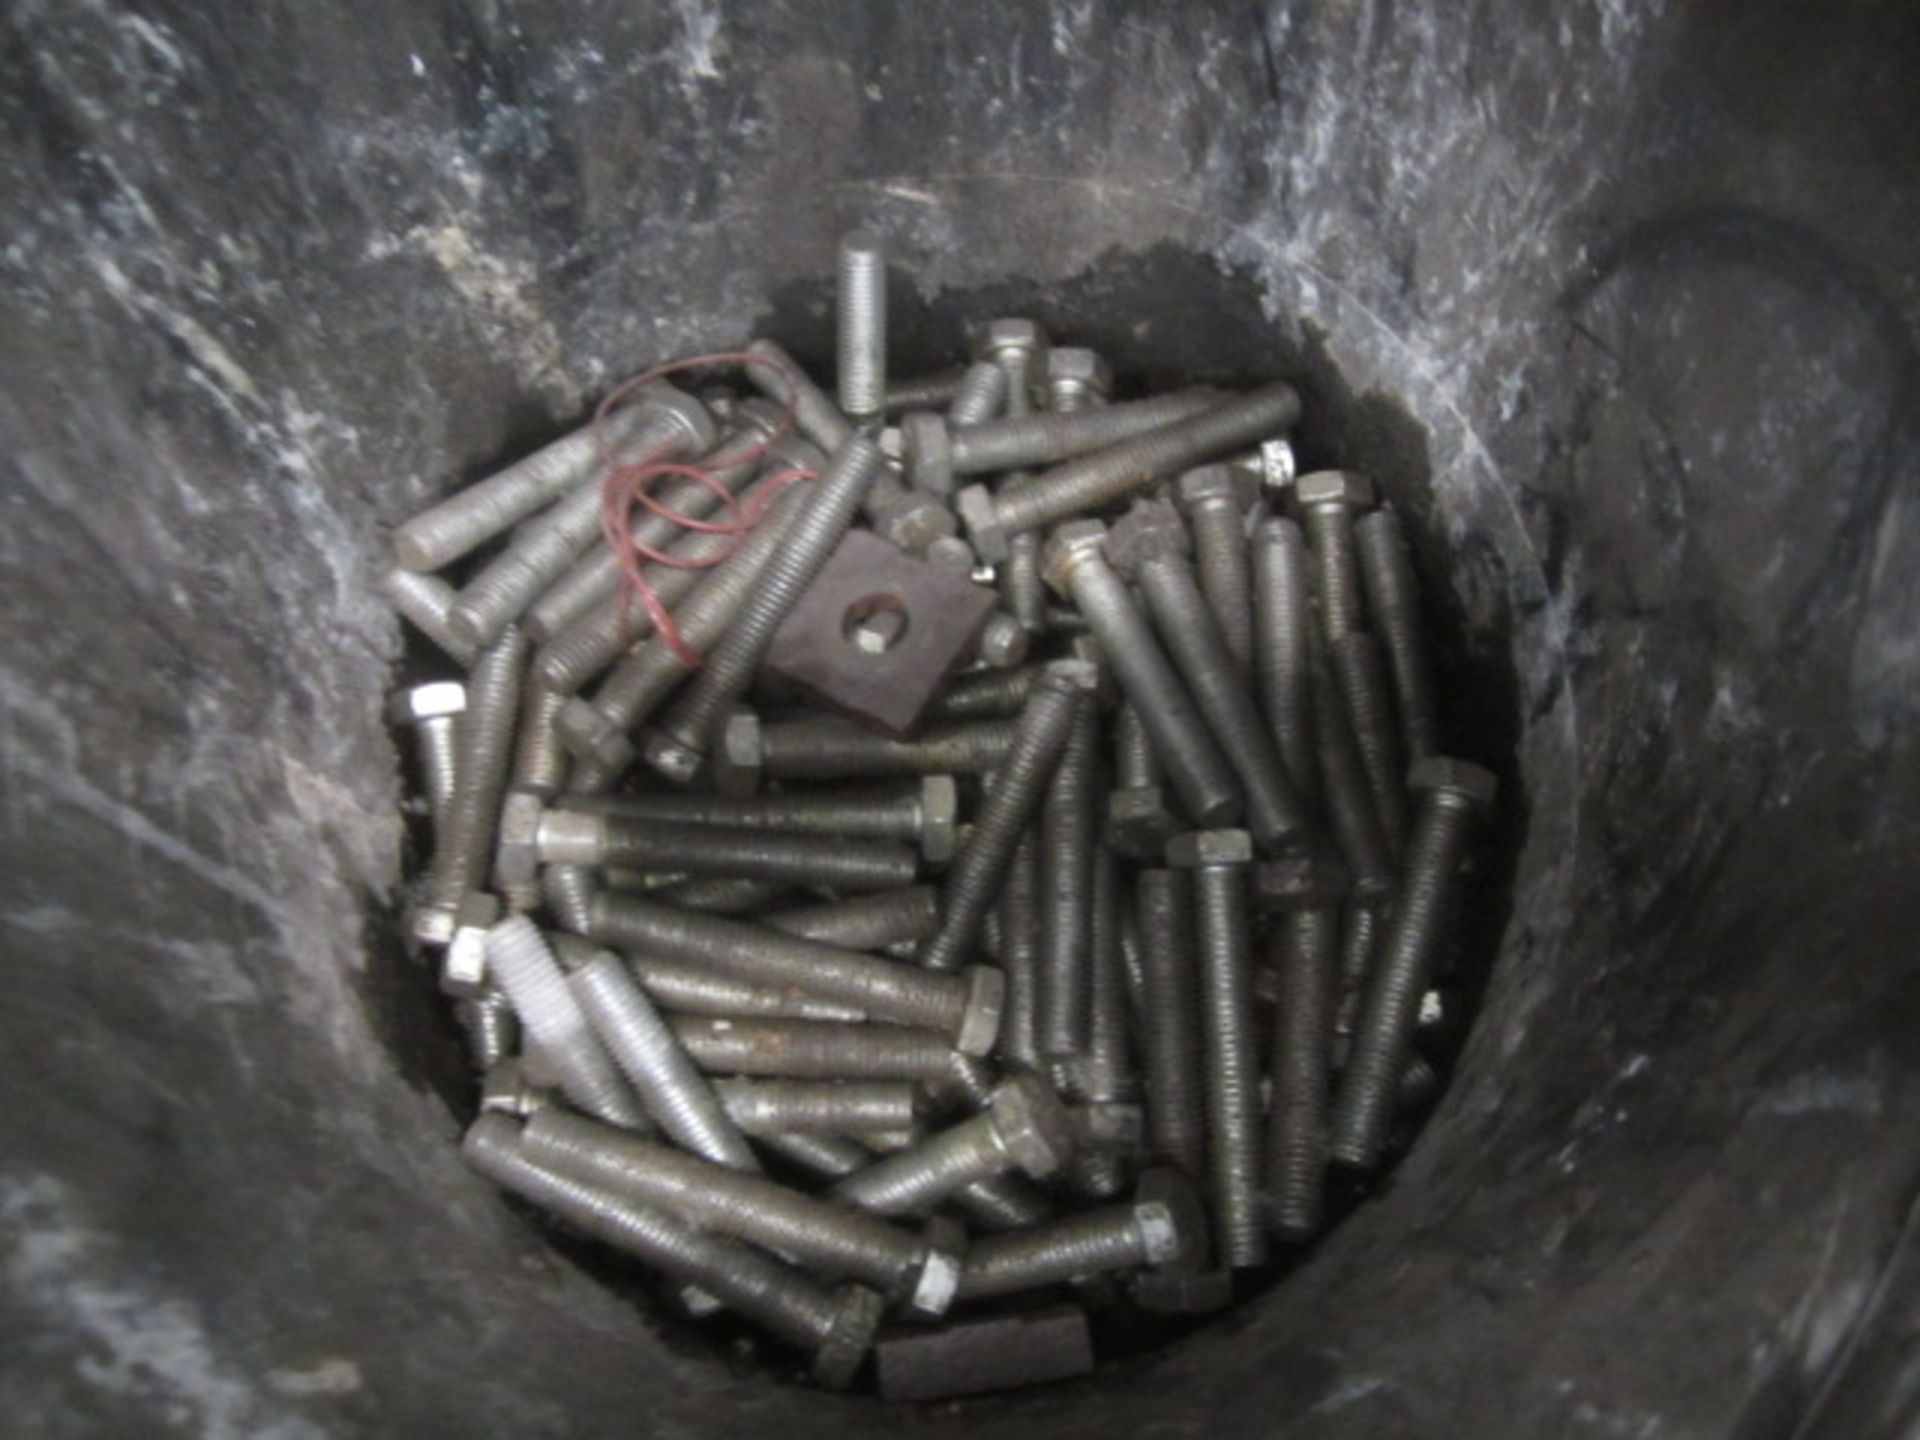 Contents of bay of racking including steel profiles, heavy duty bolts, metal clips etc., as lotted - - Image 6 of 19